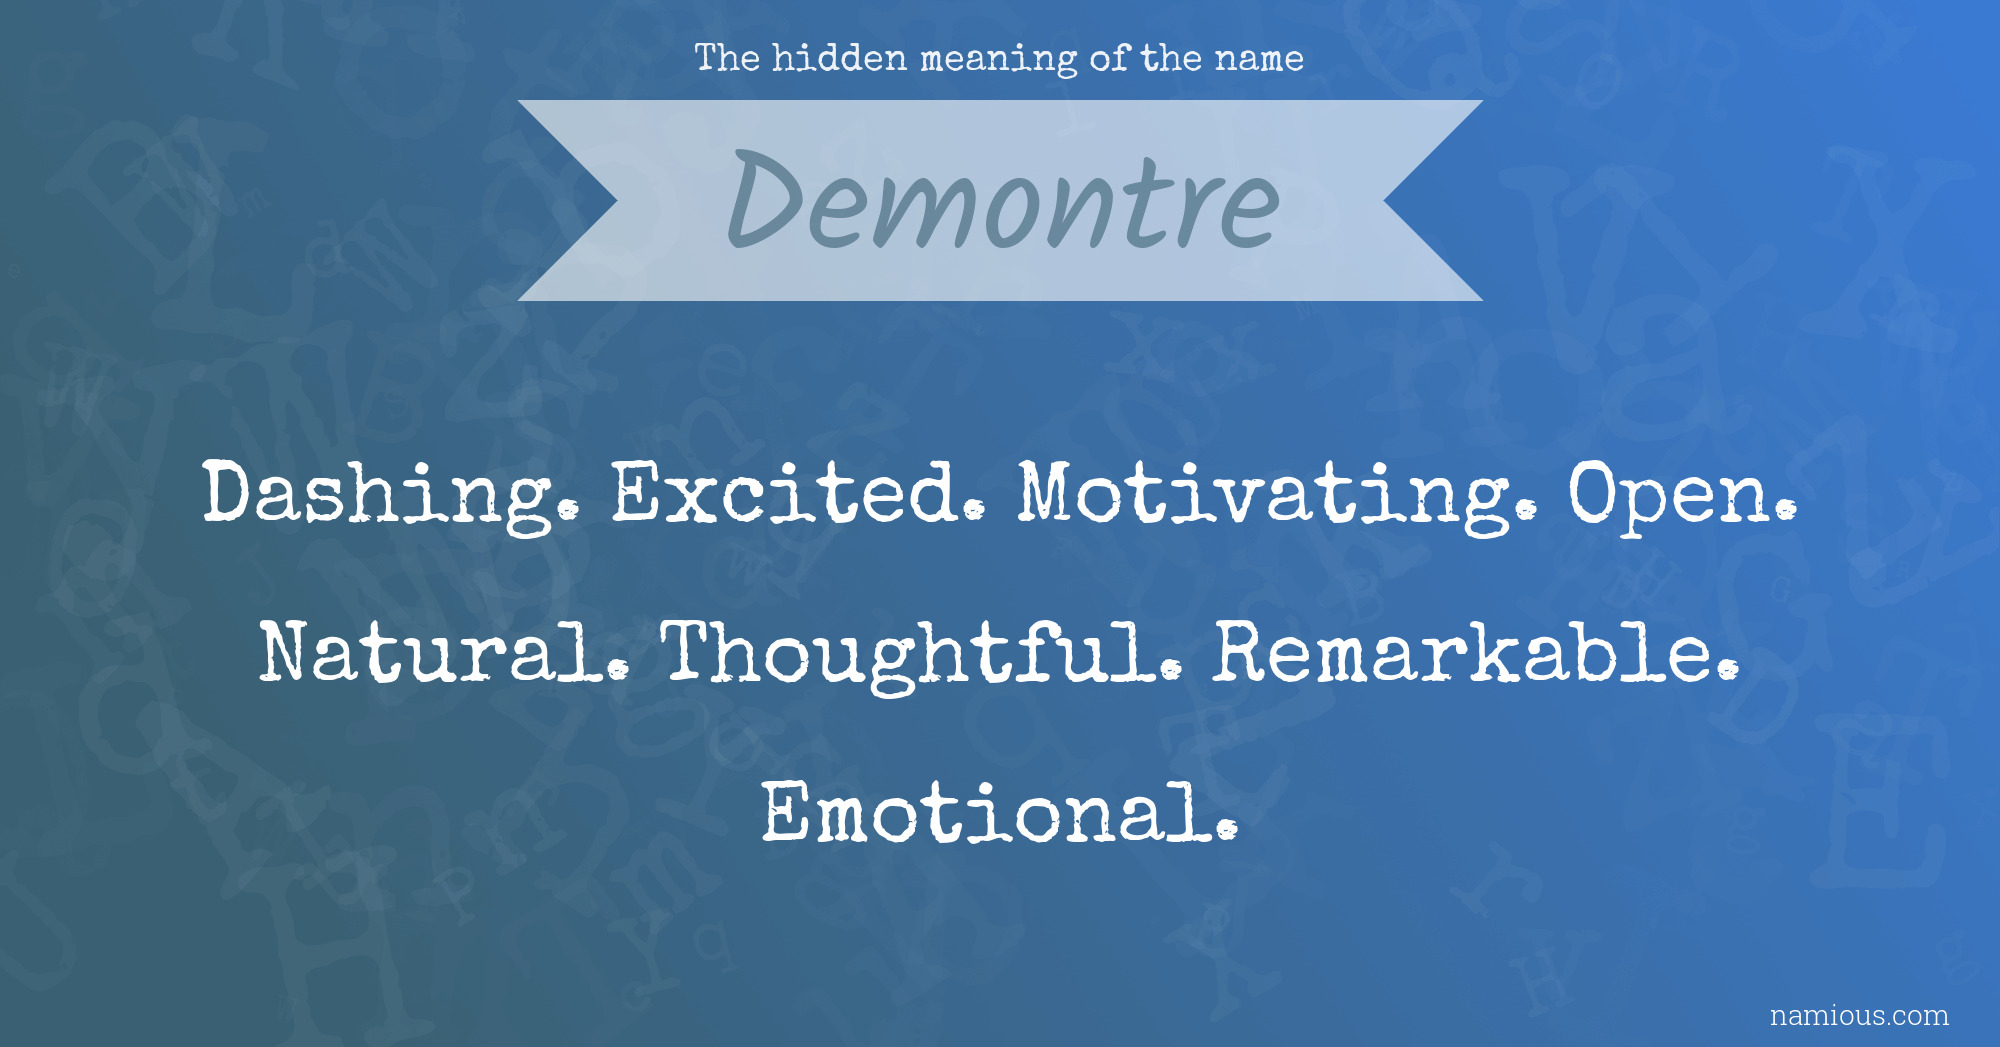 The hidden meaning of the name Demontre